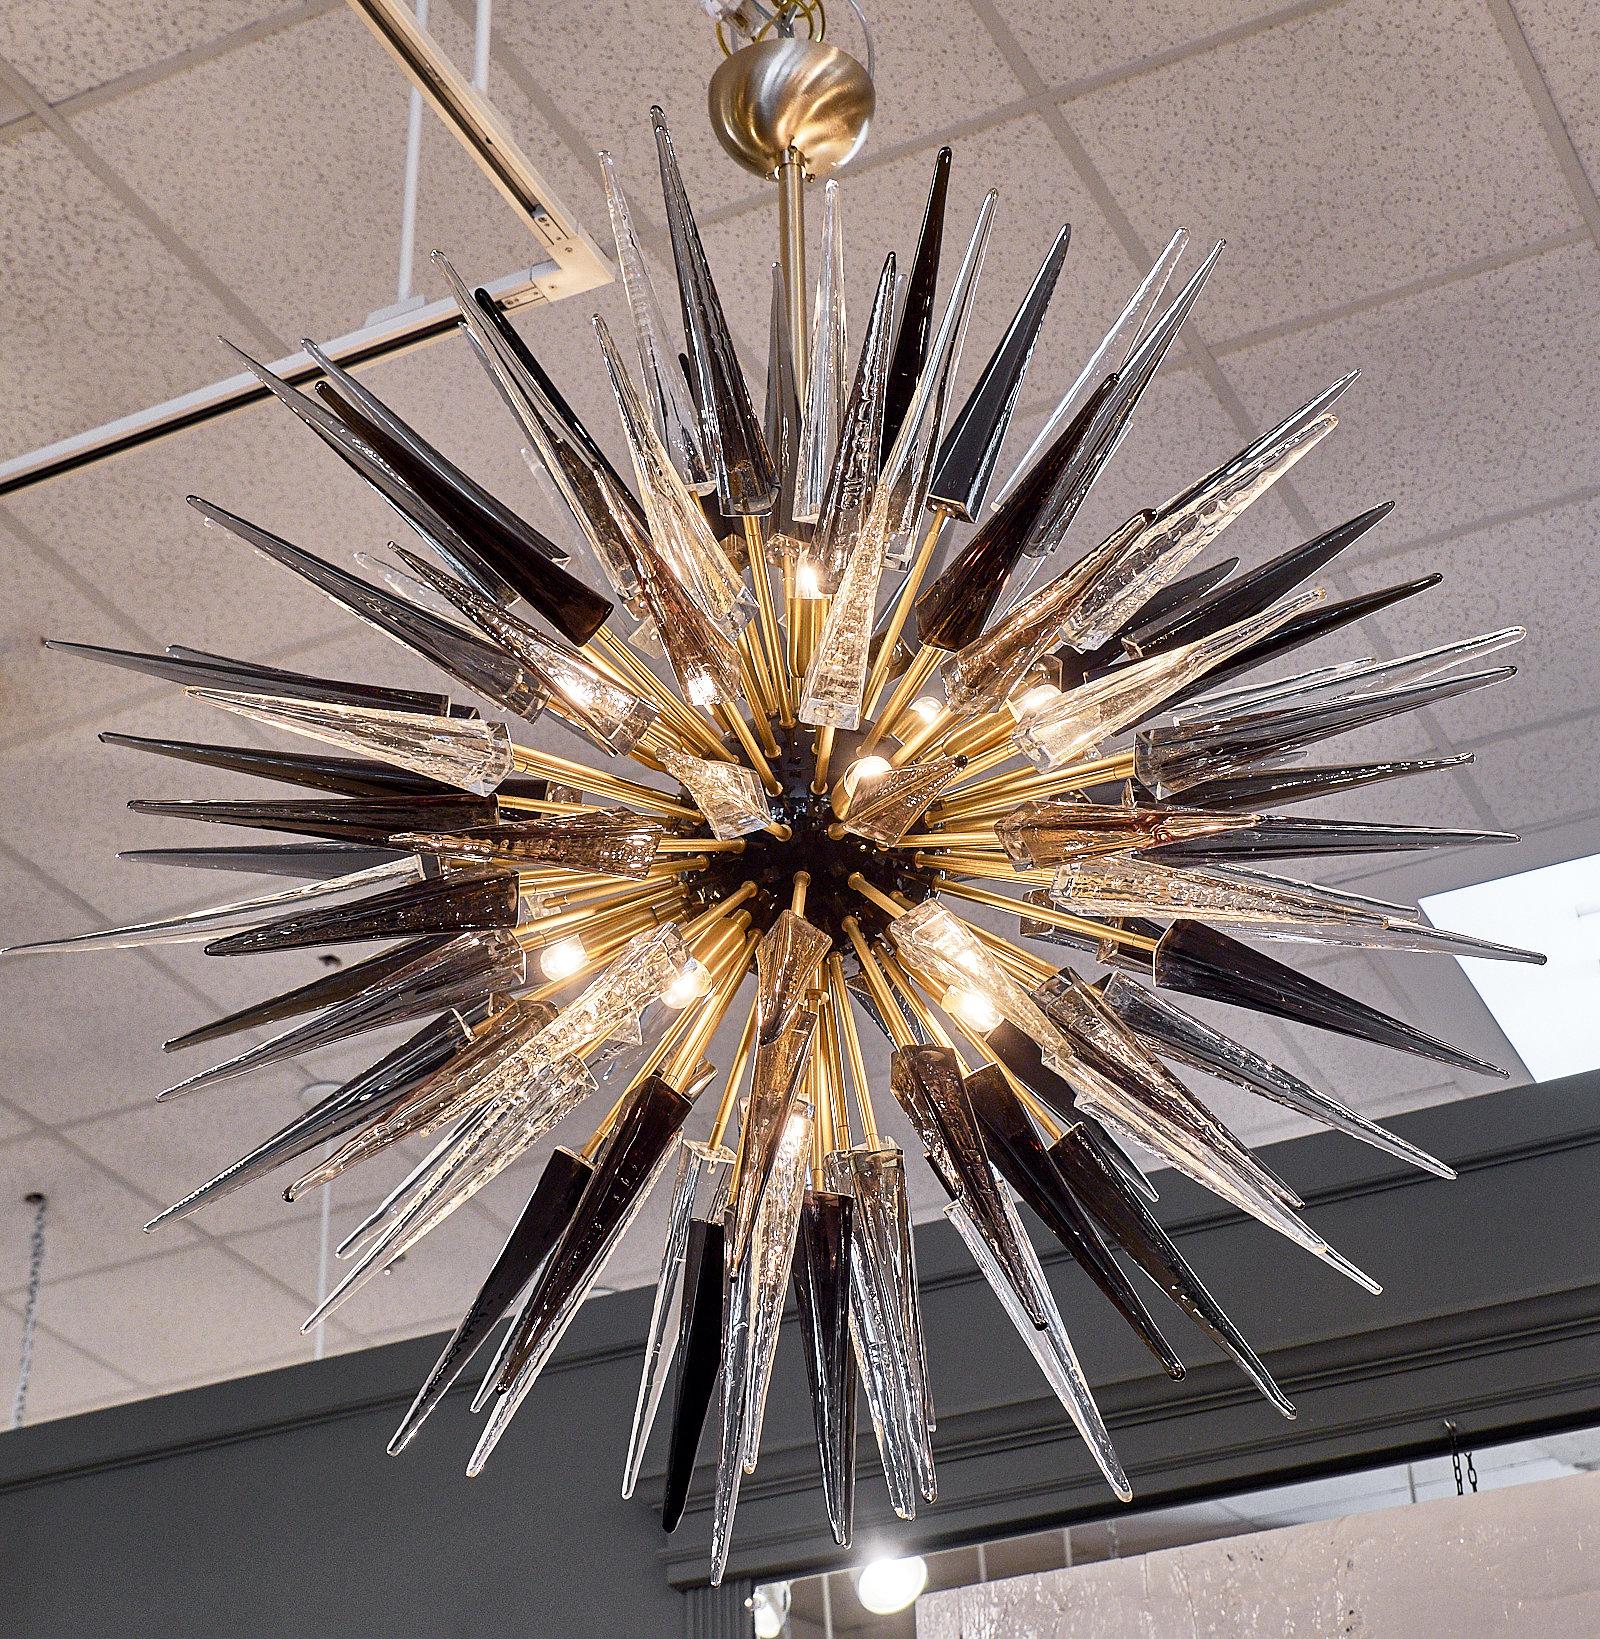 Italian Murano glass sputnik prism chandelier. This fixture features many hand blown textured prisms of various colors (black, gray, clear) mounted on a gilt brass structure. This spectacular chandelier has a stunning decorative impact! It has been